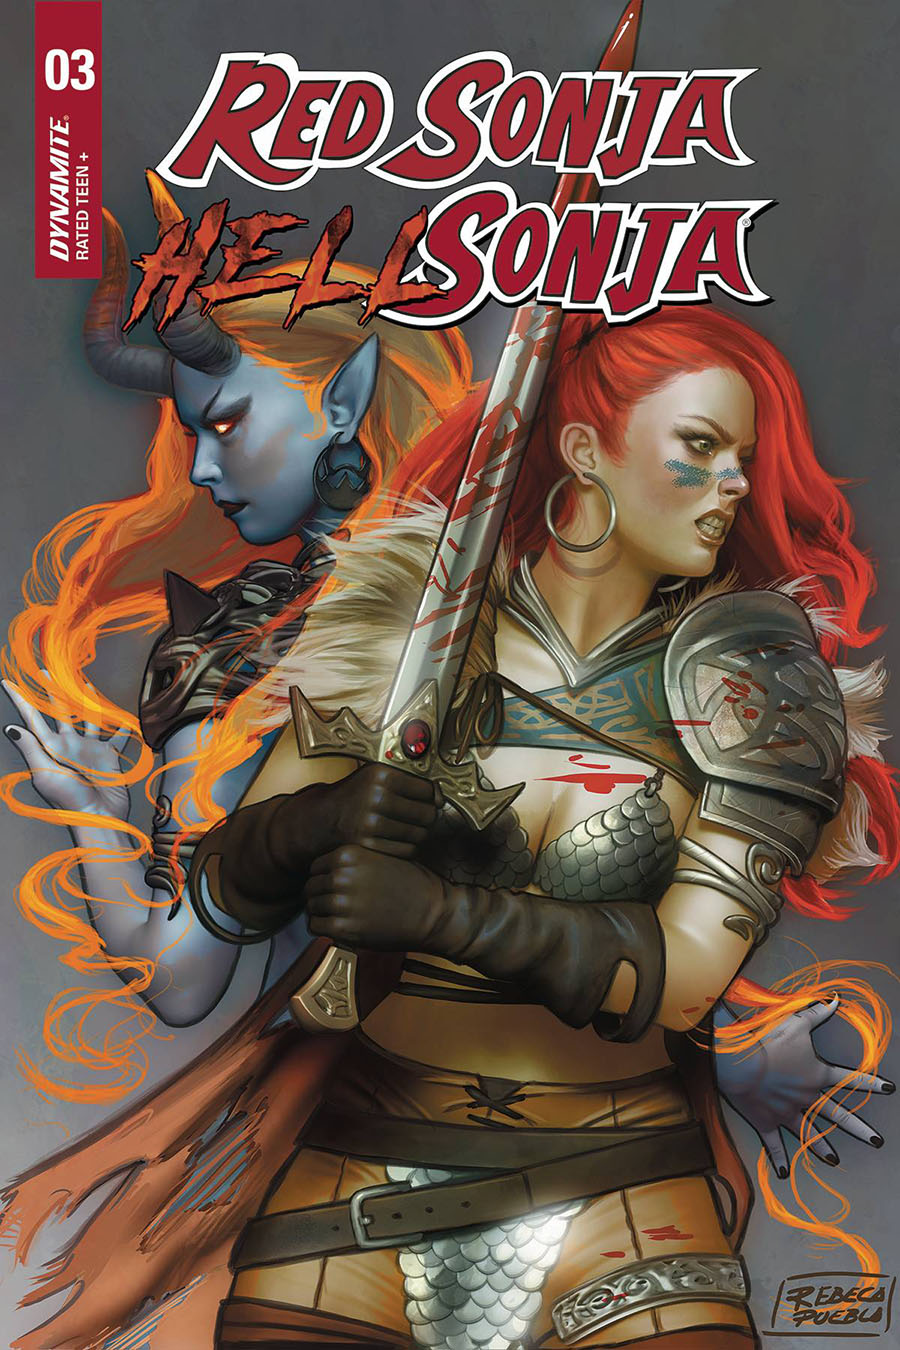 Red Sonja Hell Sonja #3 Cover D Variant Rebeca Puebla Cover